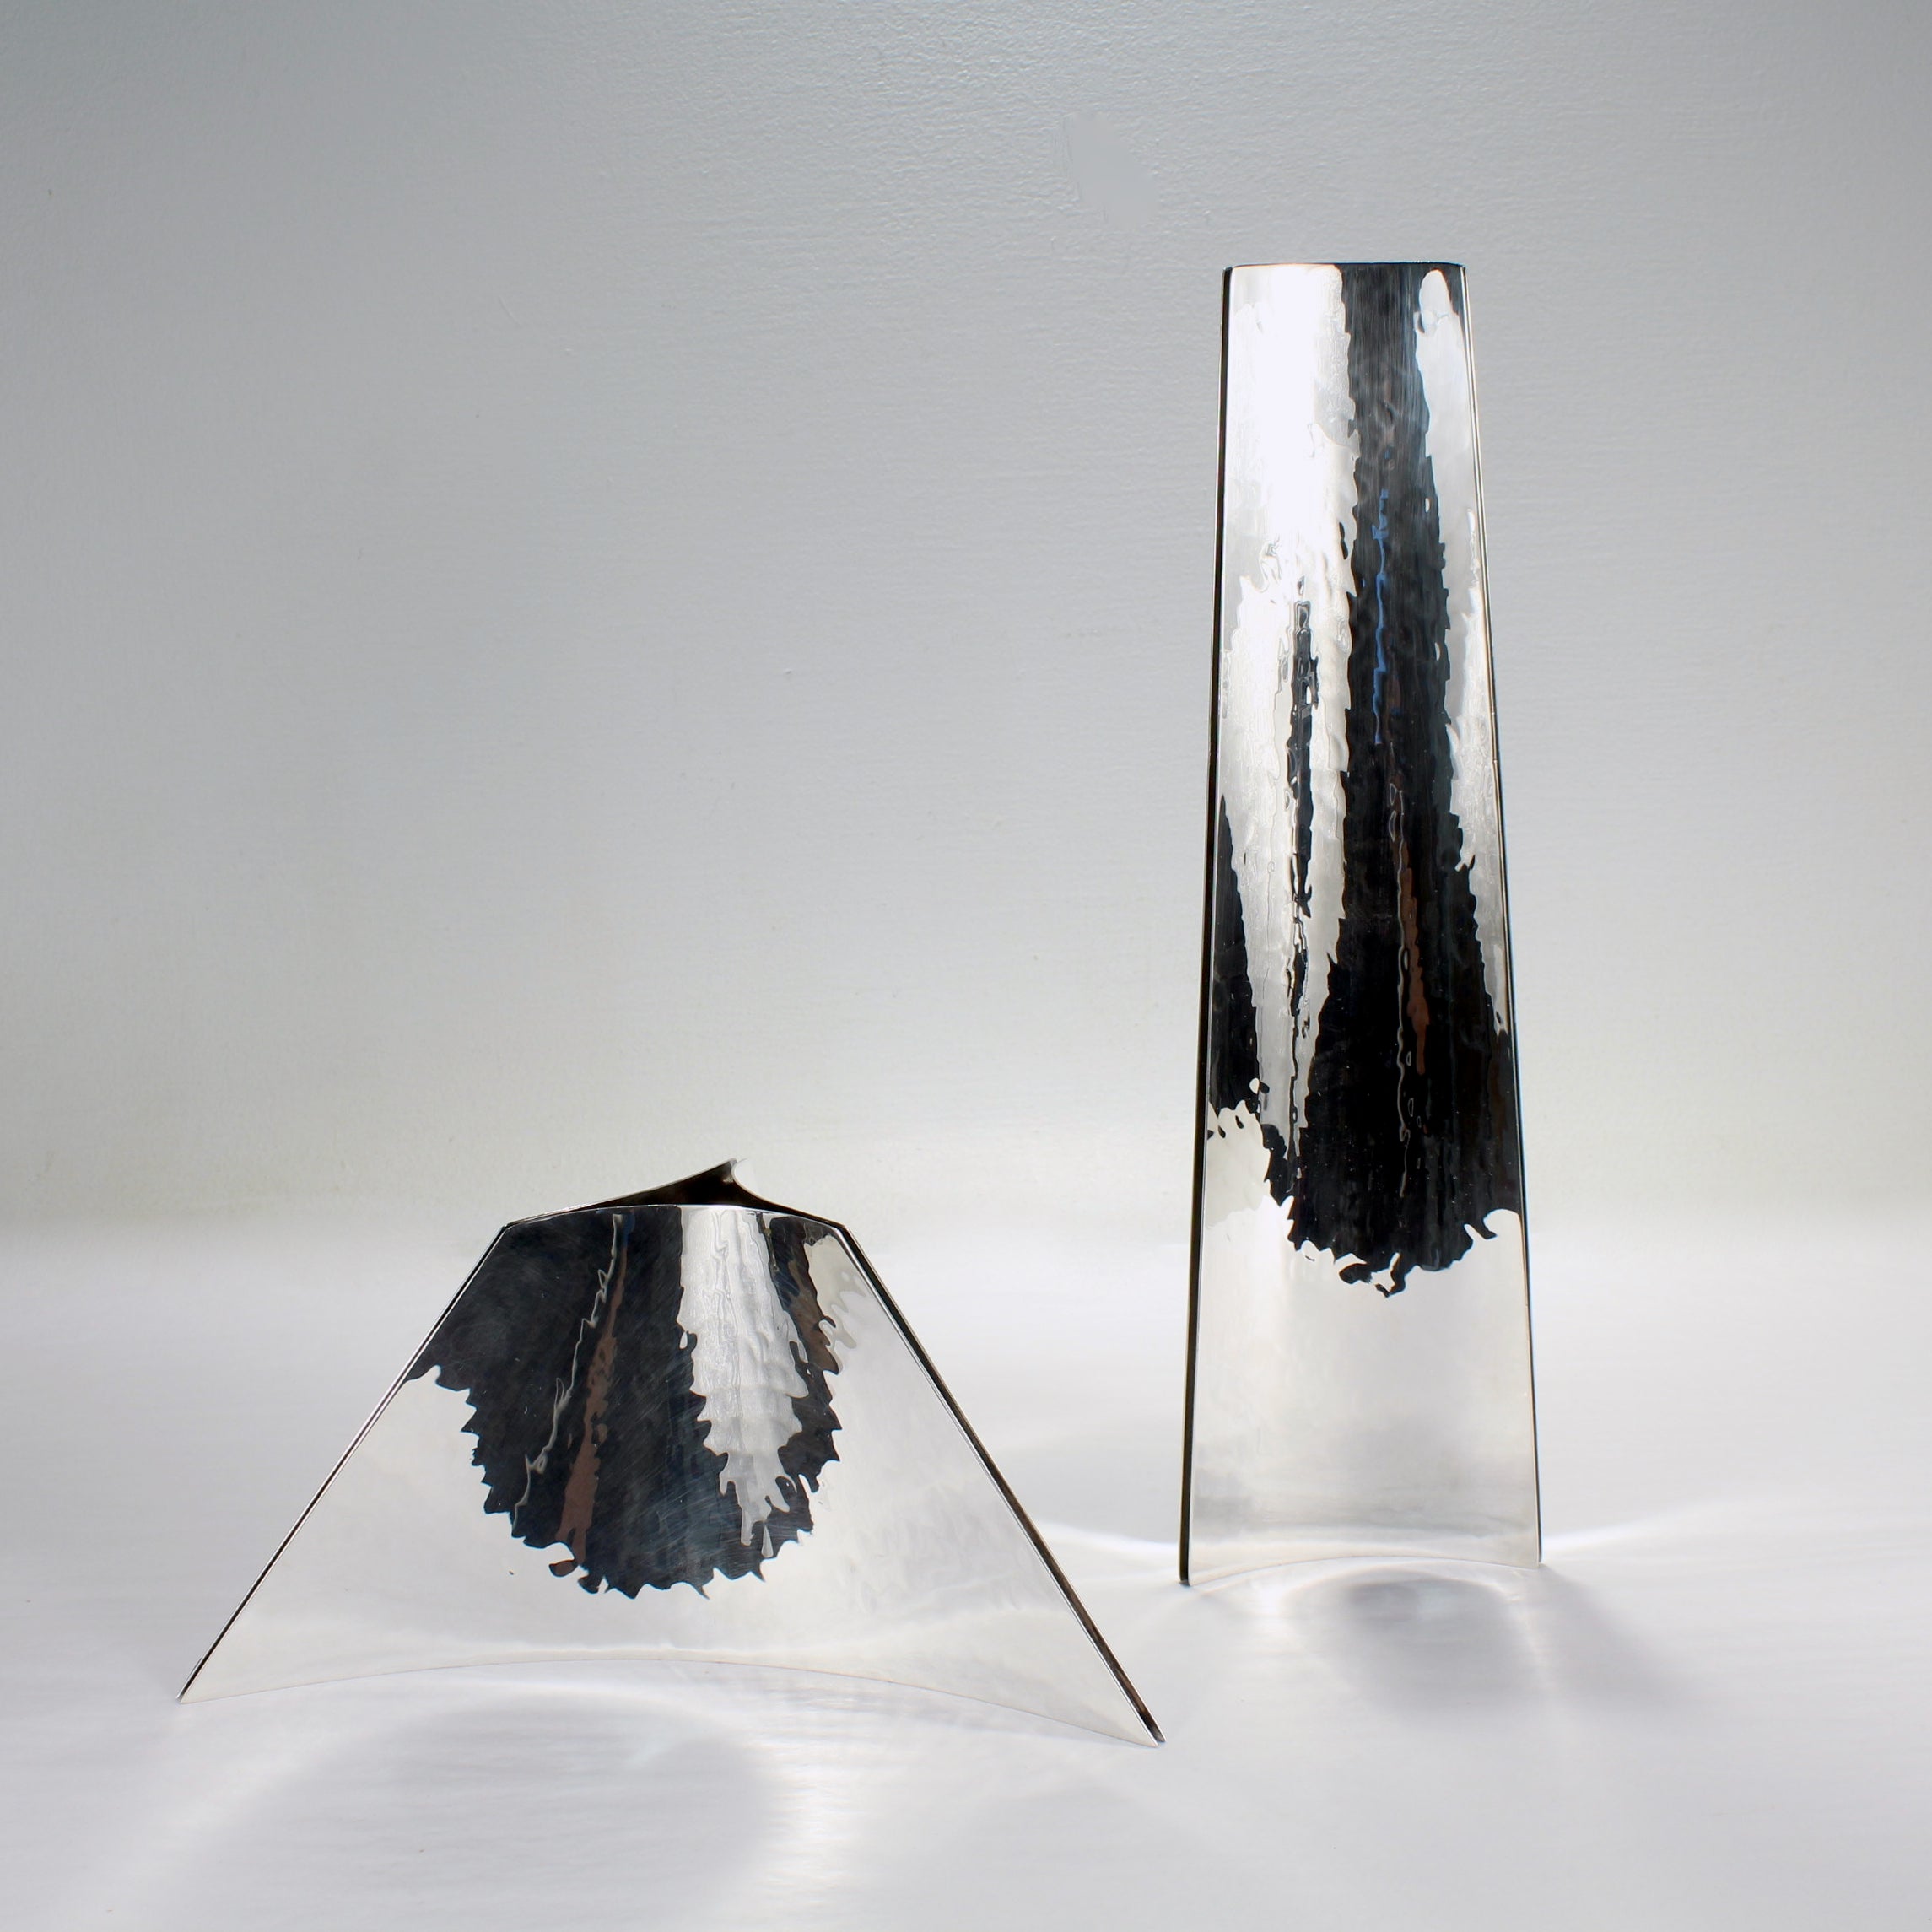 A fine pair of Italian modernist vases.

In hand-hammered sterling silver. 

Designed by Angelo Mangiarotti.

Produced by Cleto Munari in an edition of 300.

Mangiarotti (1921-2012) was an Milanese-born architect and designer who was at the cutting